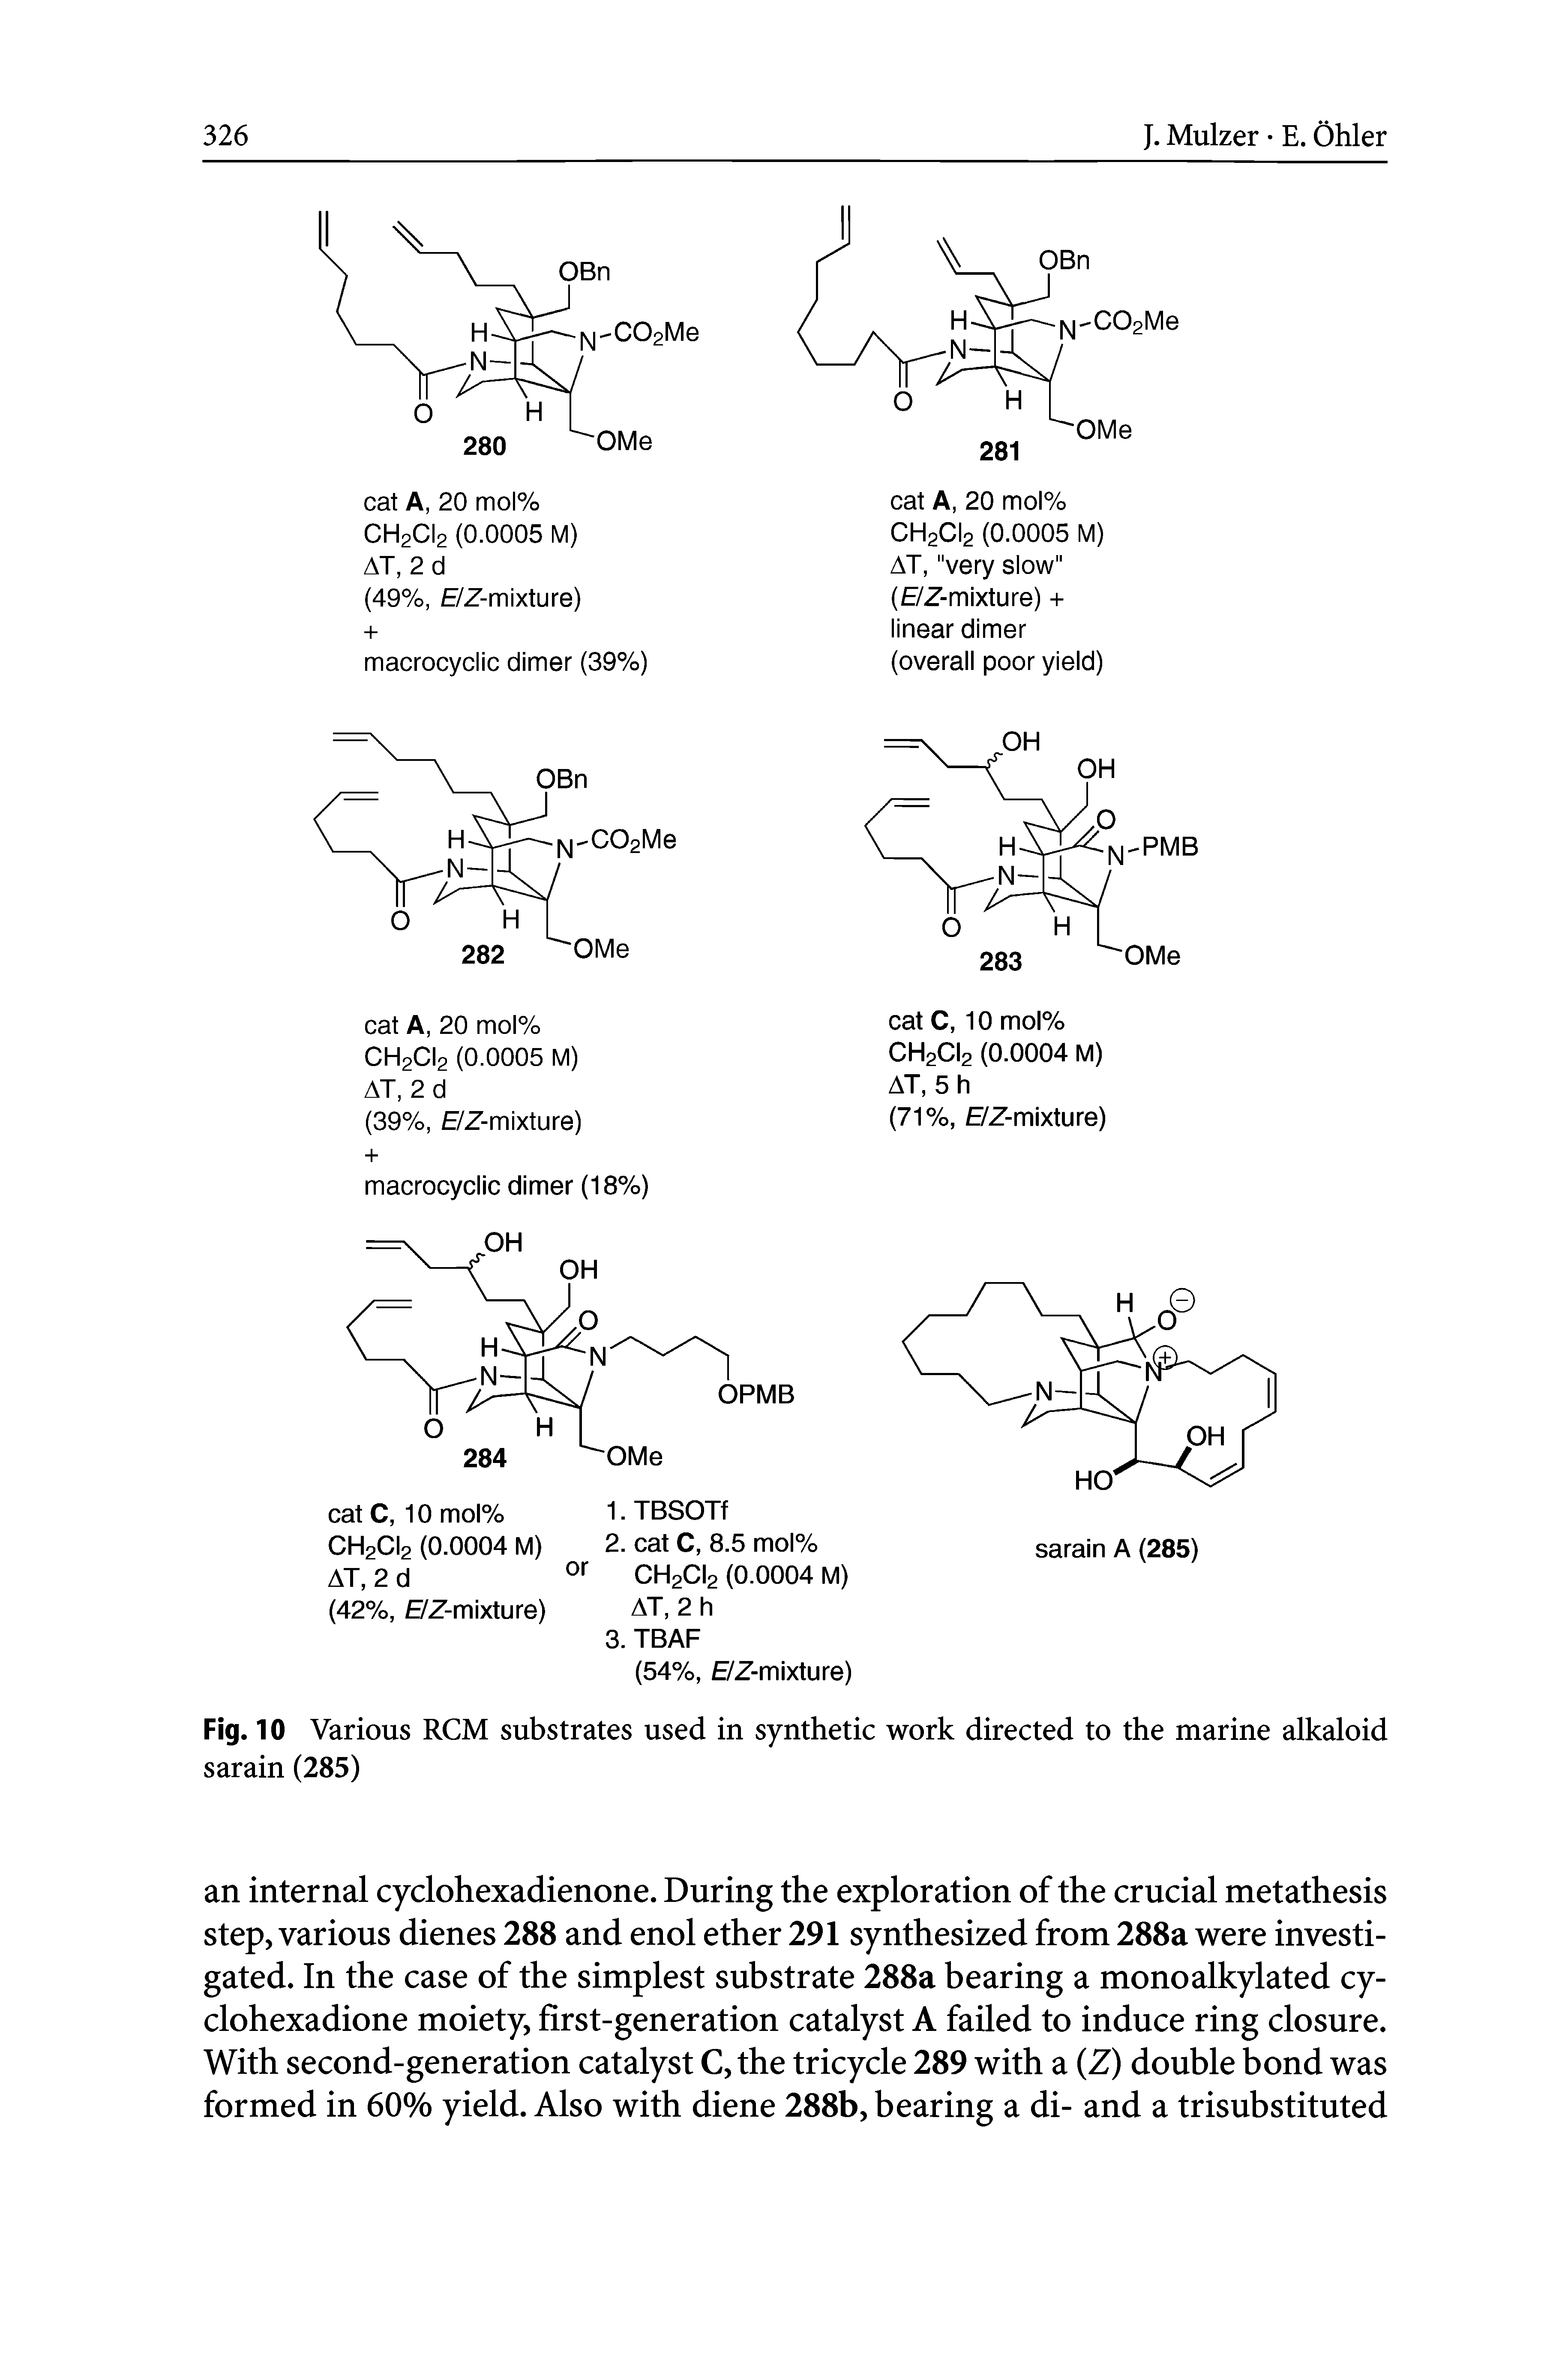 Fig. 10 Various RCM substrates used in synthetic work directed to the marine alkaloid sarain (285)...